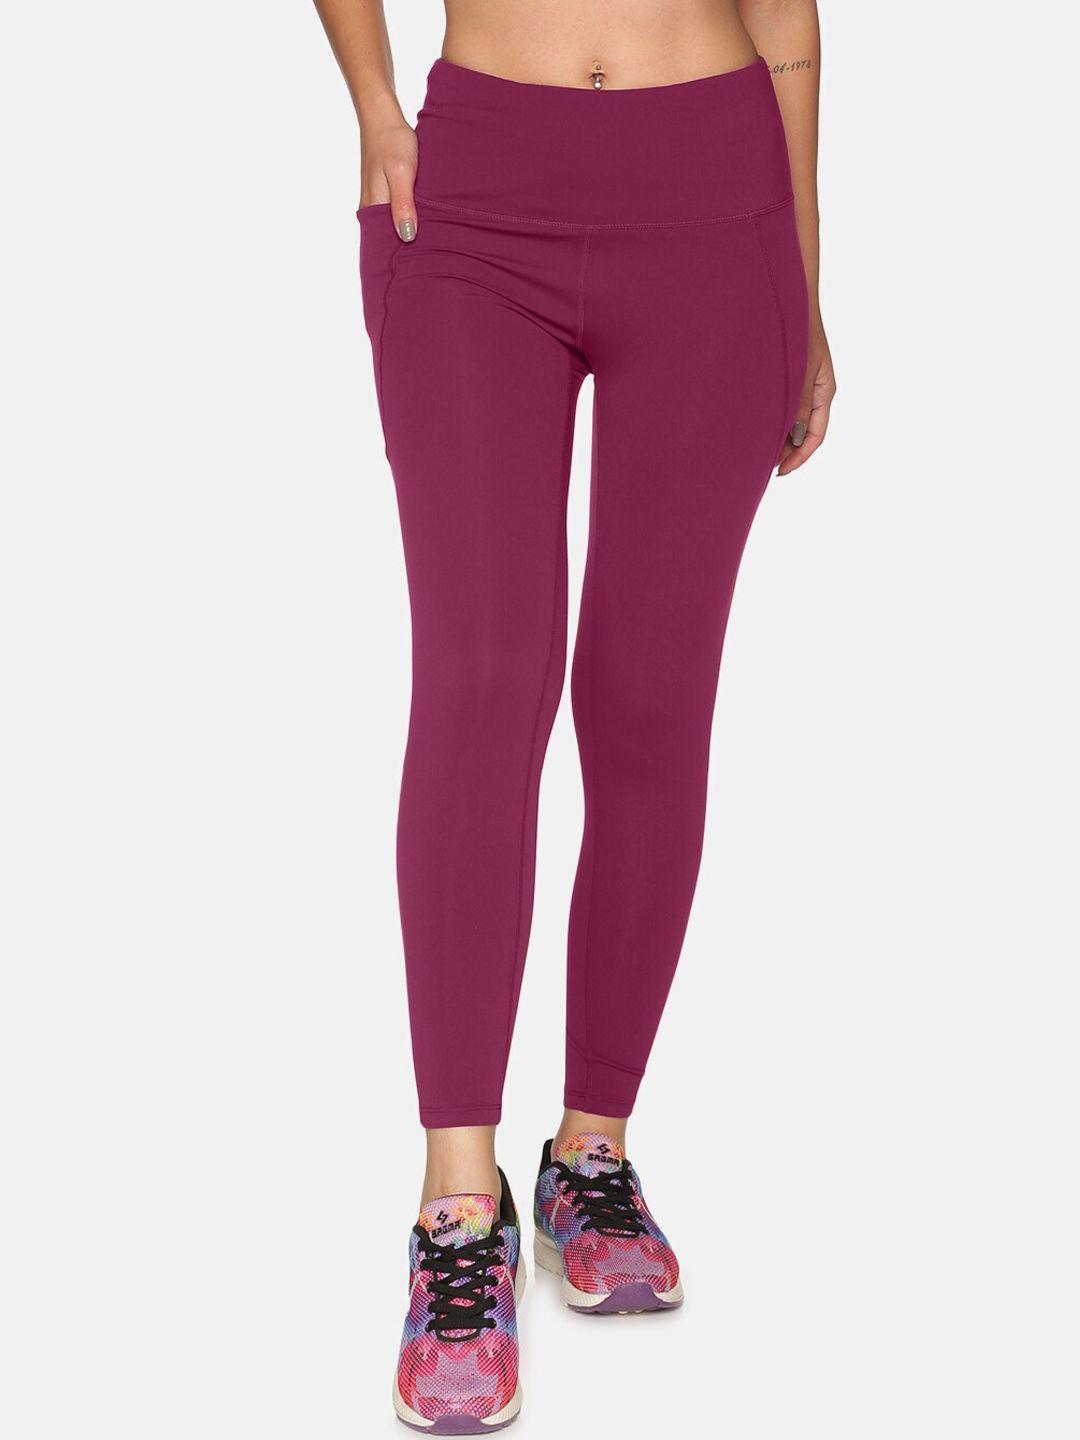 blissclub women wine super stretchy and high waisted the ultimate leggings